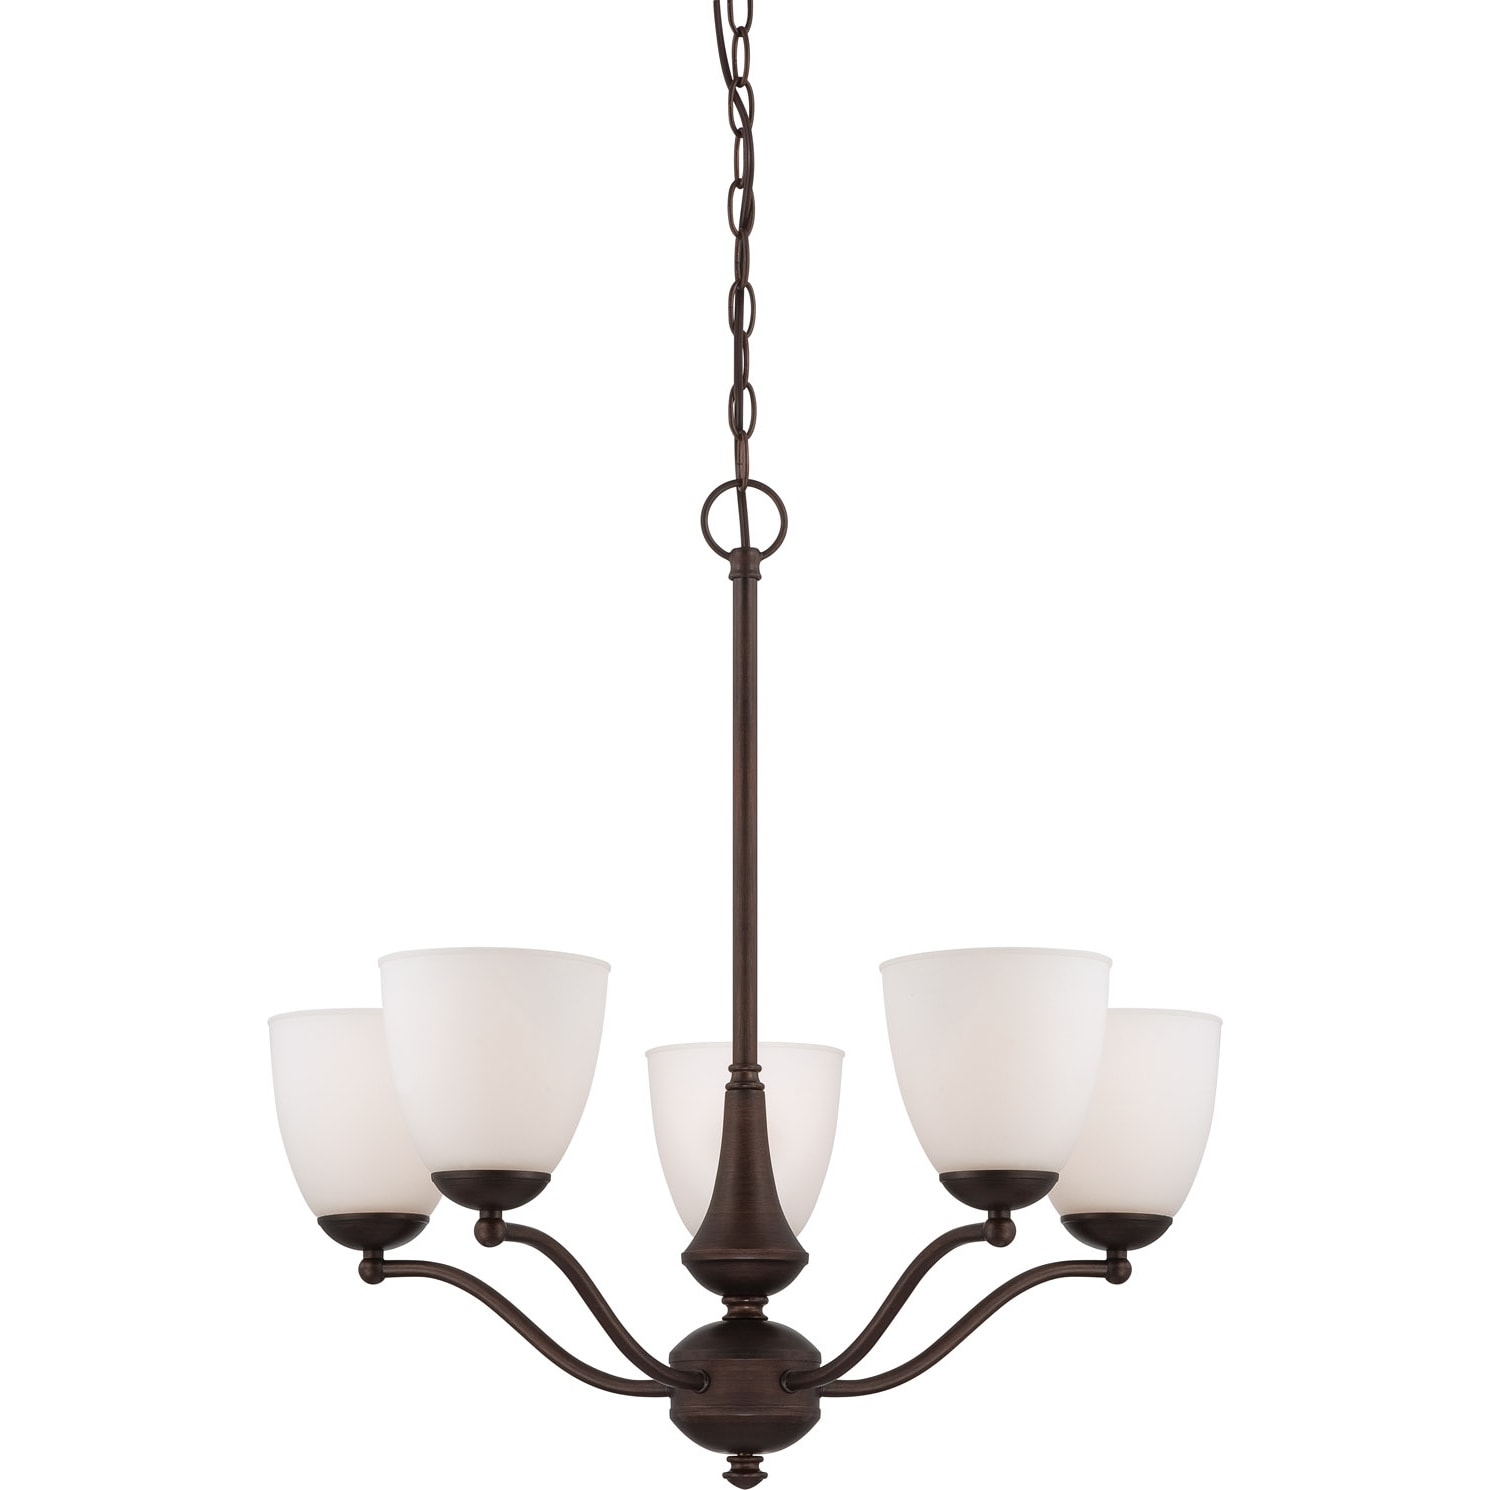 Nuvo Patton Five light Prairie Bronze Fluorescent Chandelier With Frosted glass Shades